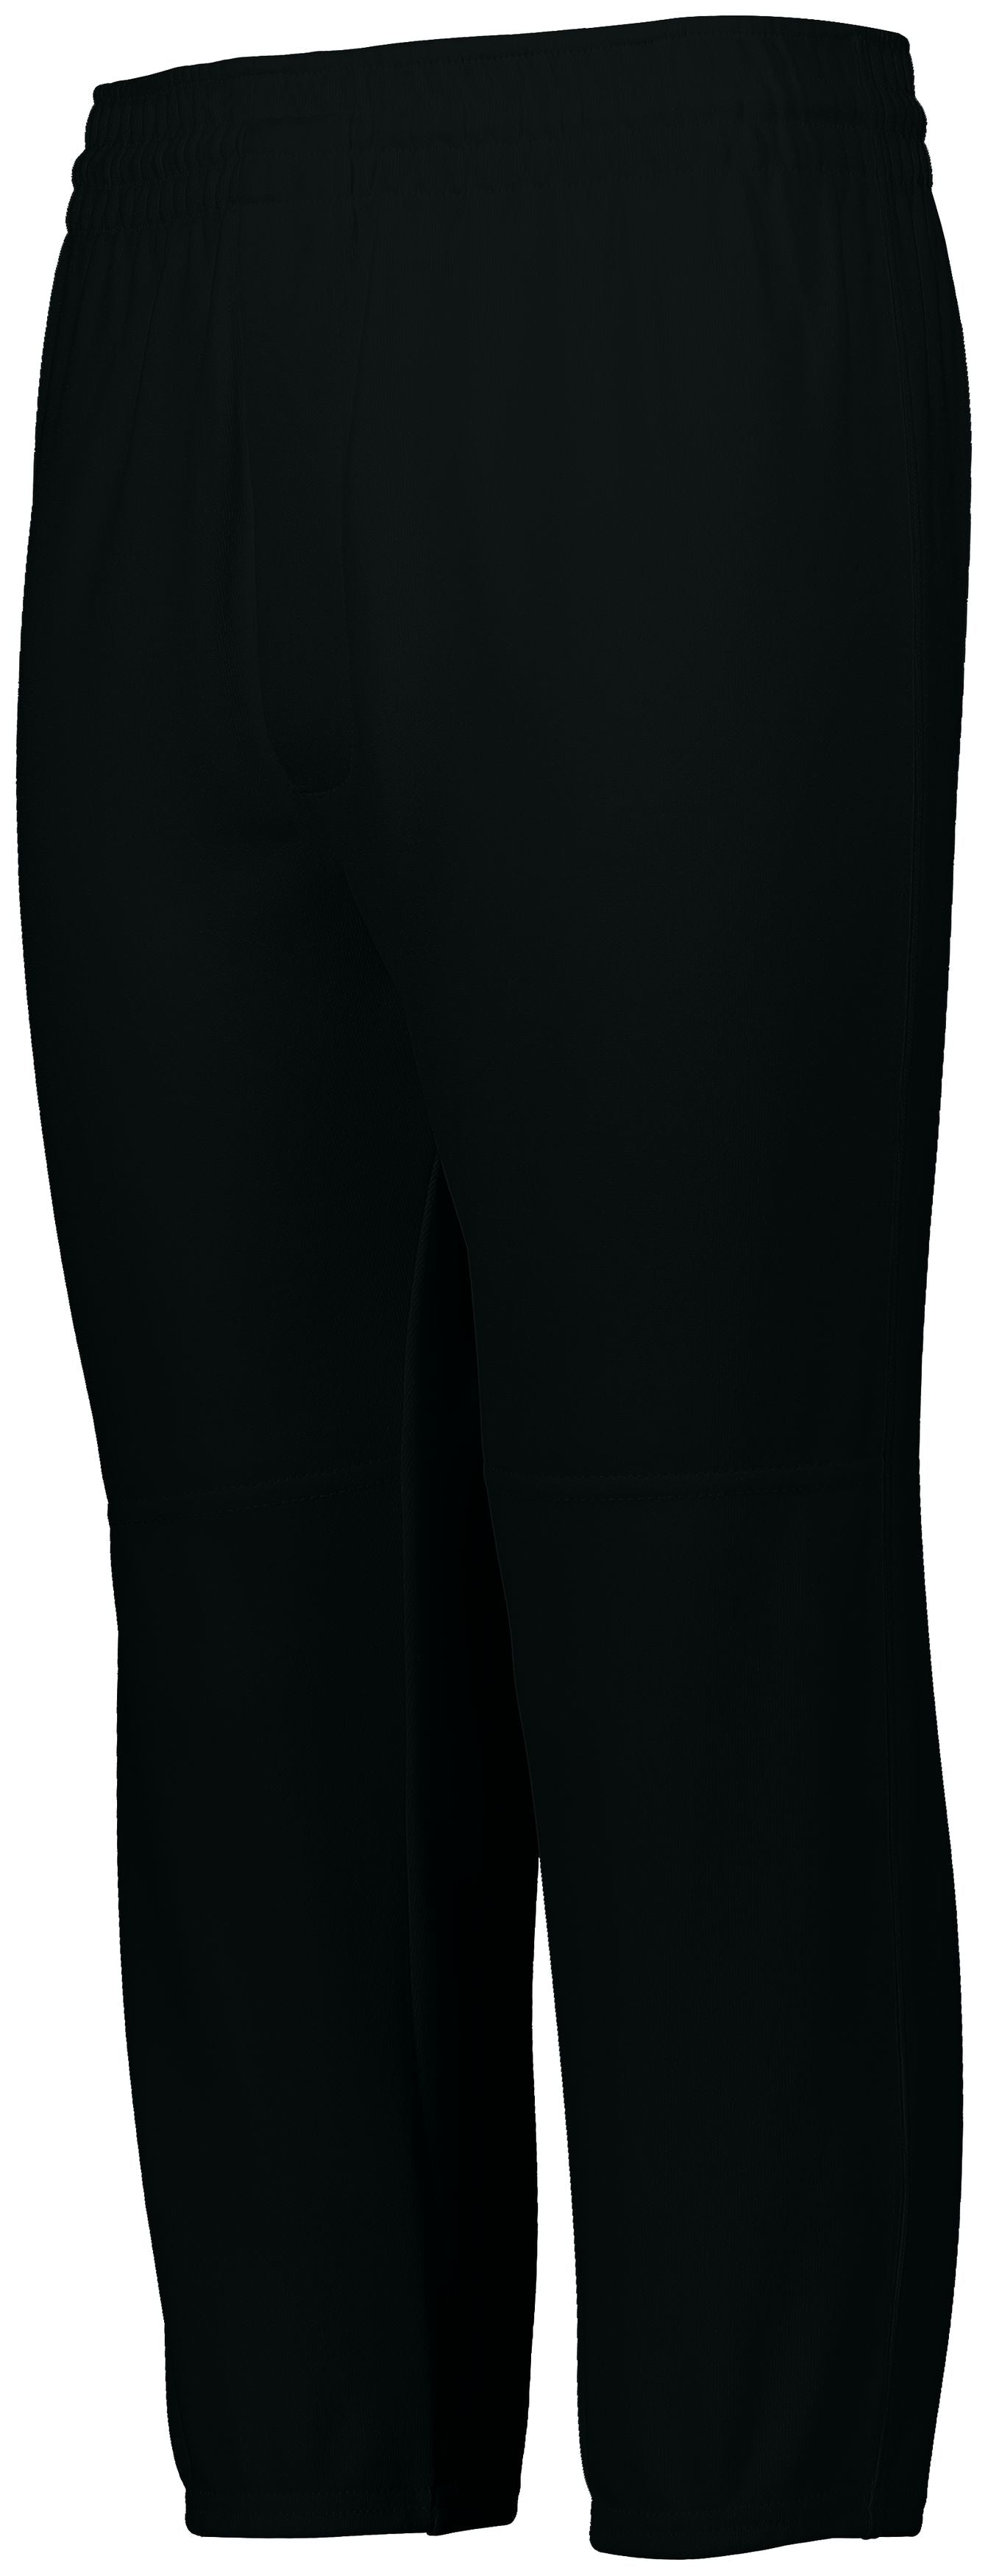 Augusta Sportswear Youth Pull-Up Baseball Pant in Black  -Part of the Youth, Youth-Pants, Pants, Augusta-Products, Baseball, All-Sports, All-Sports-1 product lines at KanaleyCreations.com